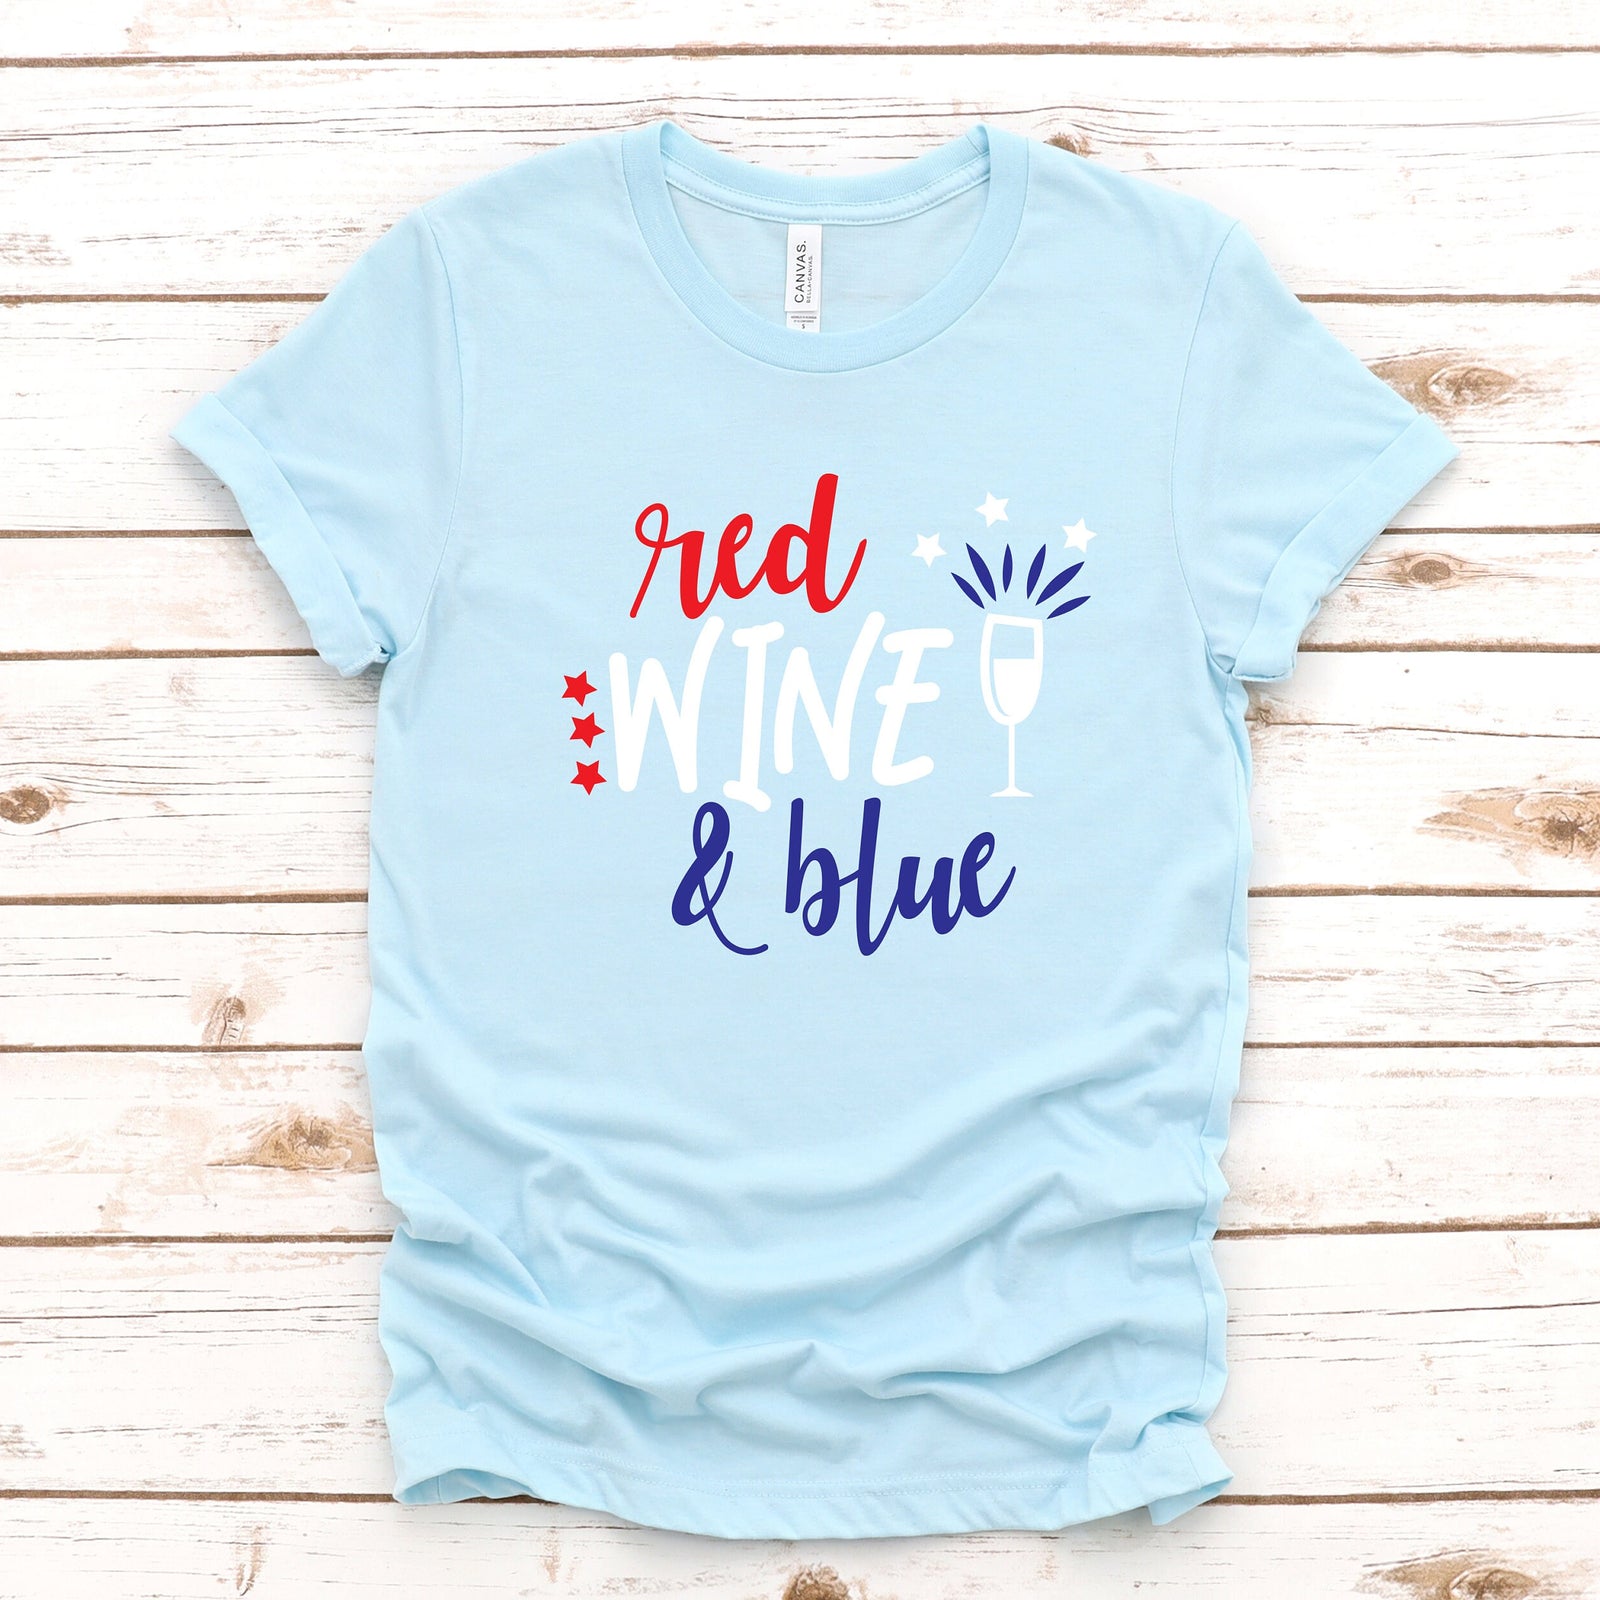 Red Wine and Blue- Fourth of July Adult T Shirt - Independence Day - Memorial - Red White and Blue